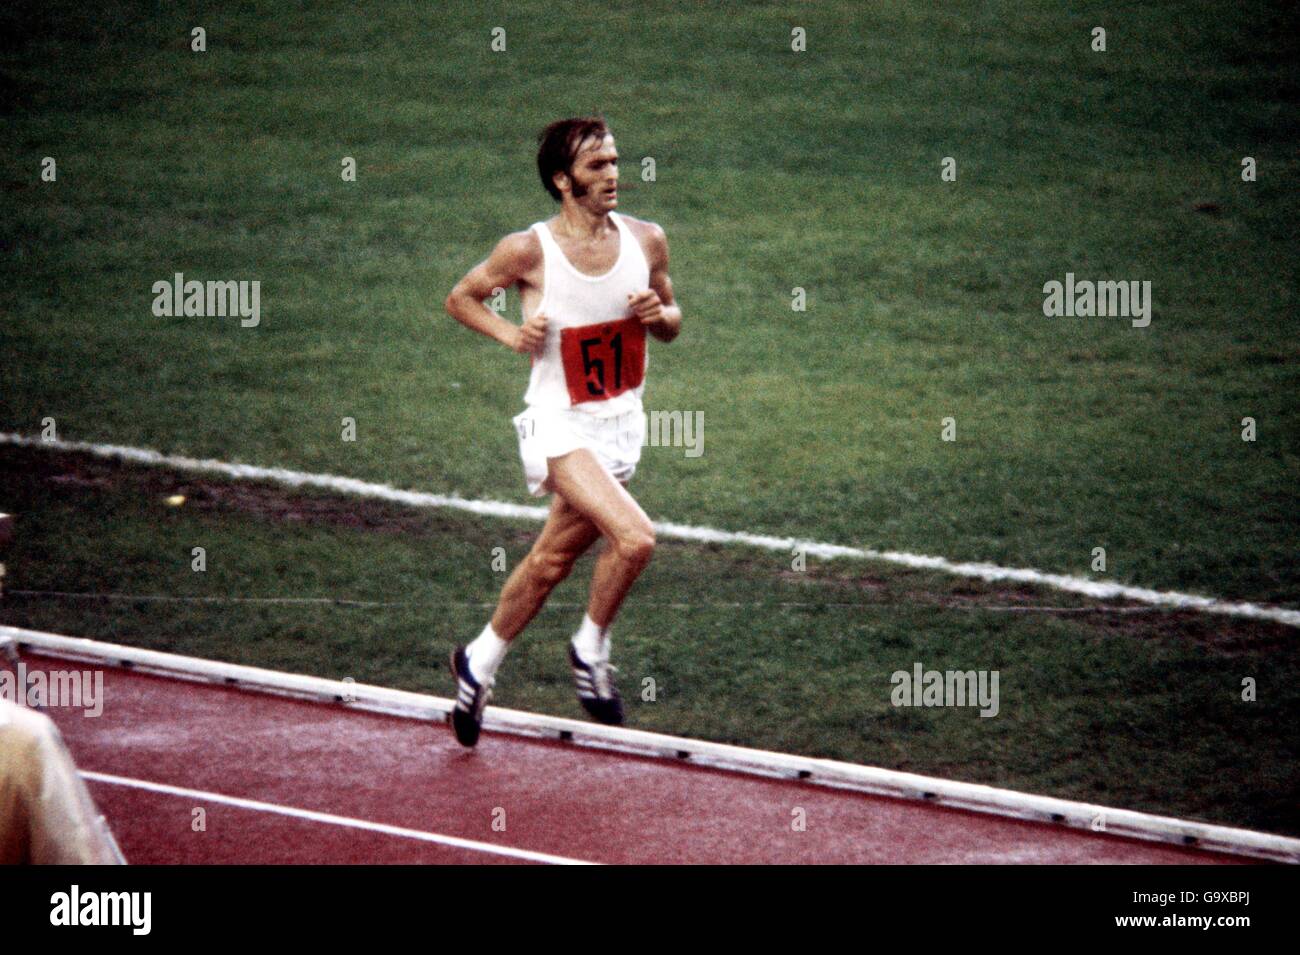 Athletics - 1976 Montreal Olympics - Marathon. East Germany's Waldemar Cierpinski enters the stadium on his way to a gold medal and Olympic record Stock Photo